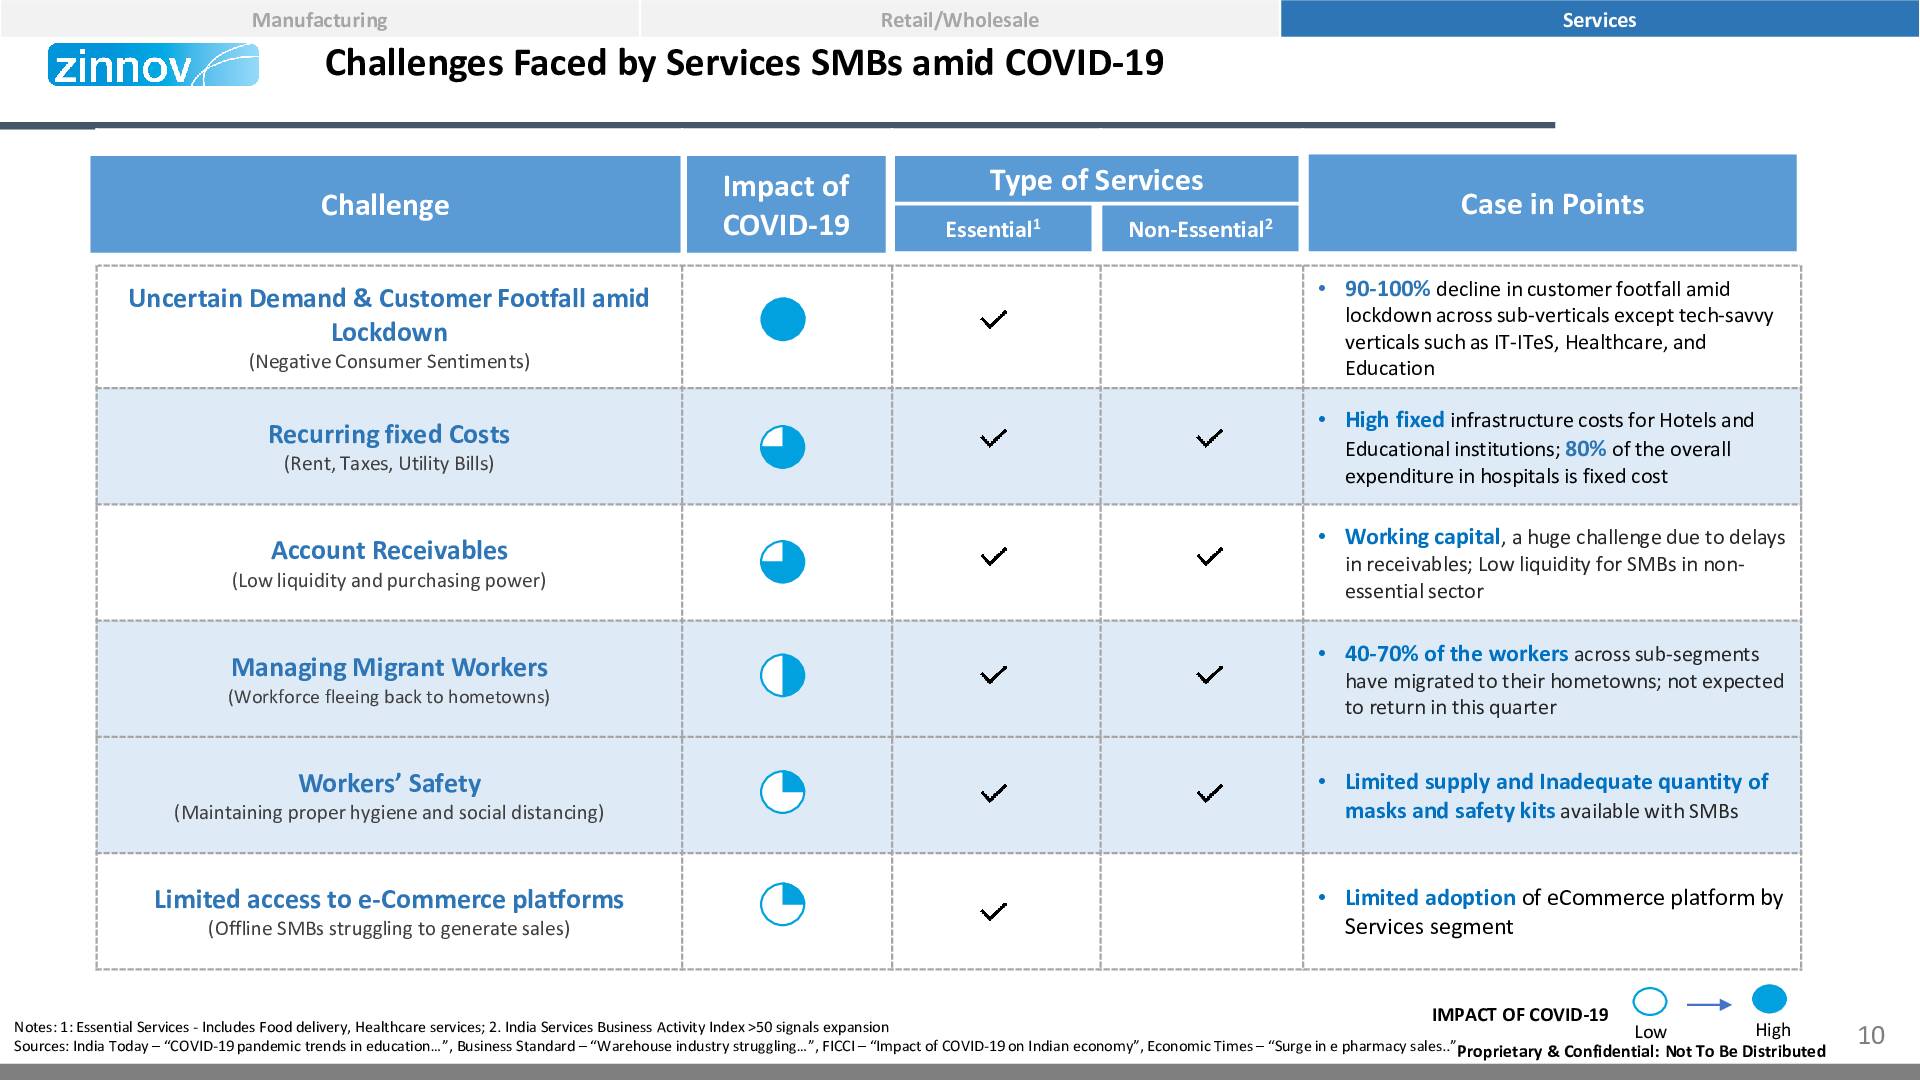 Zinnov Pov Impact Of Covid 19 On Indian Smbs10